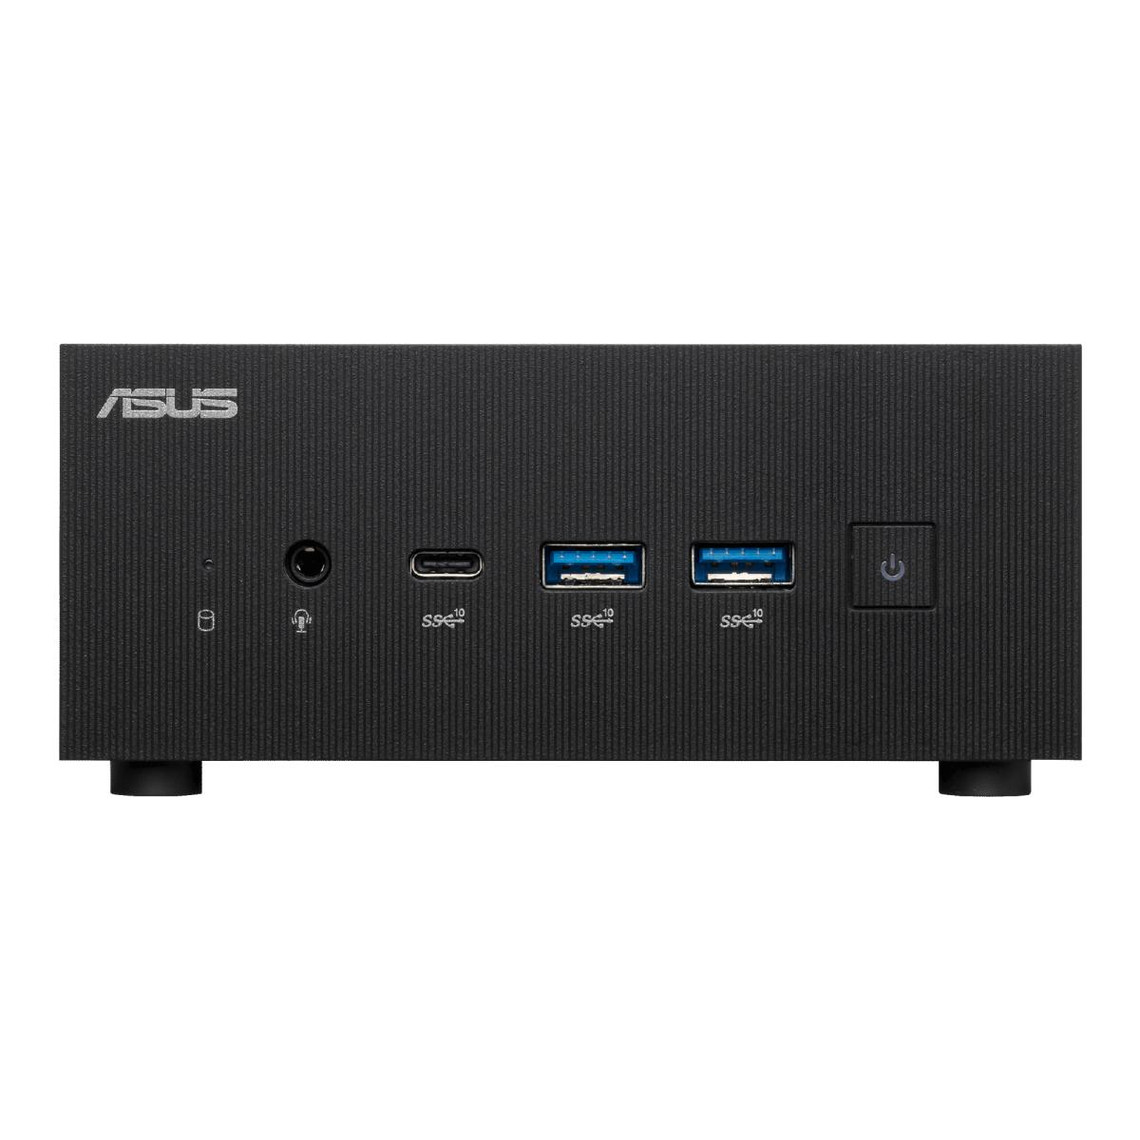 PC Fixe Asus ASUS ExpertCenter PN64-BB7014MD